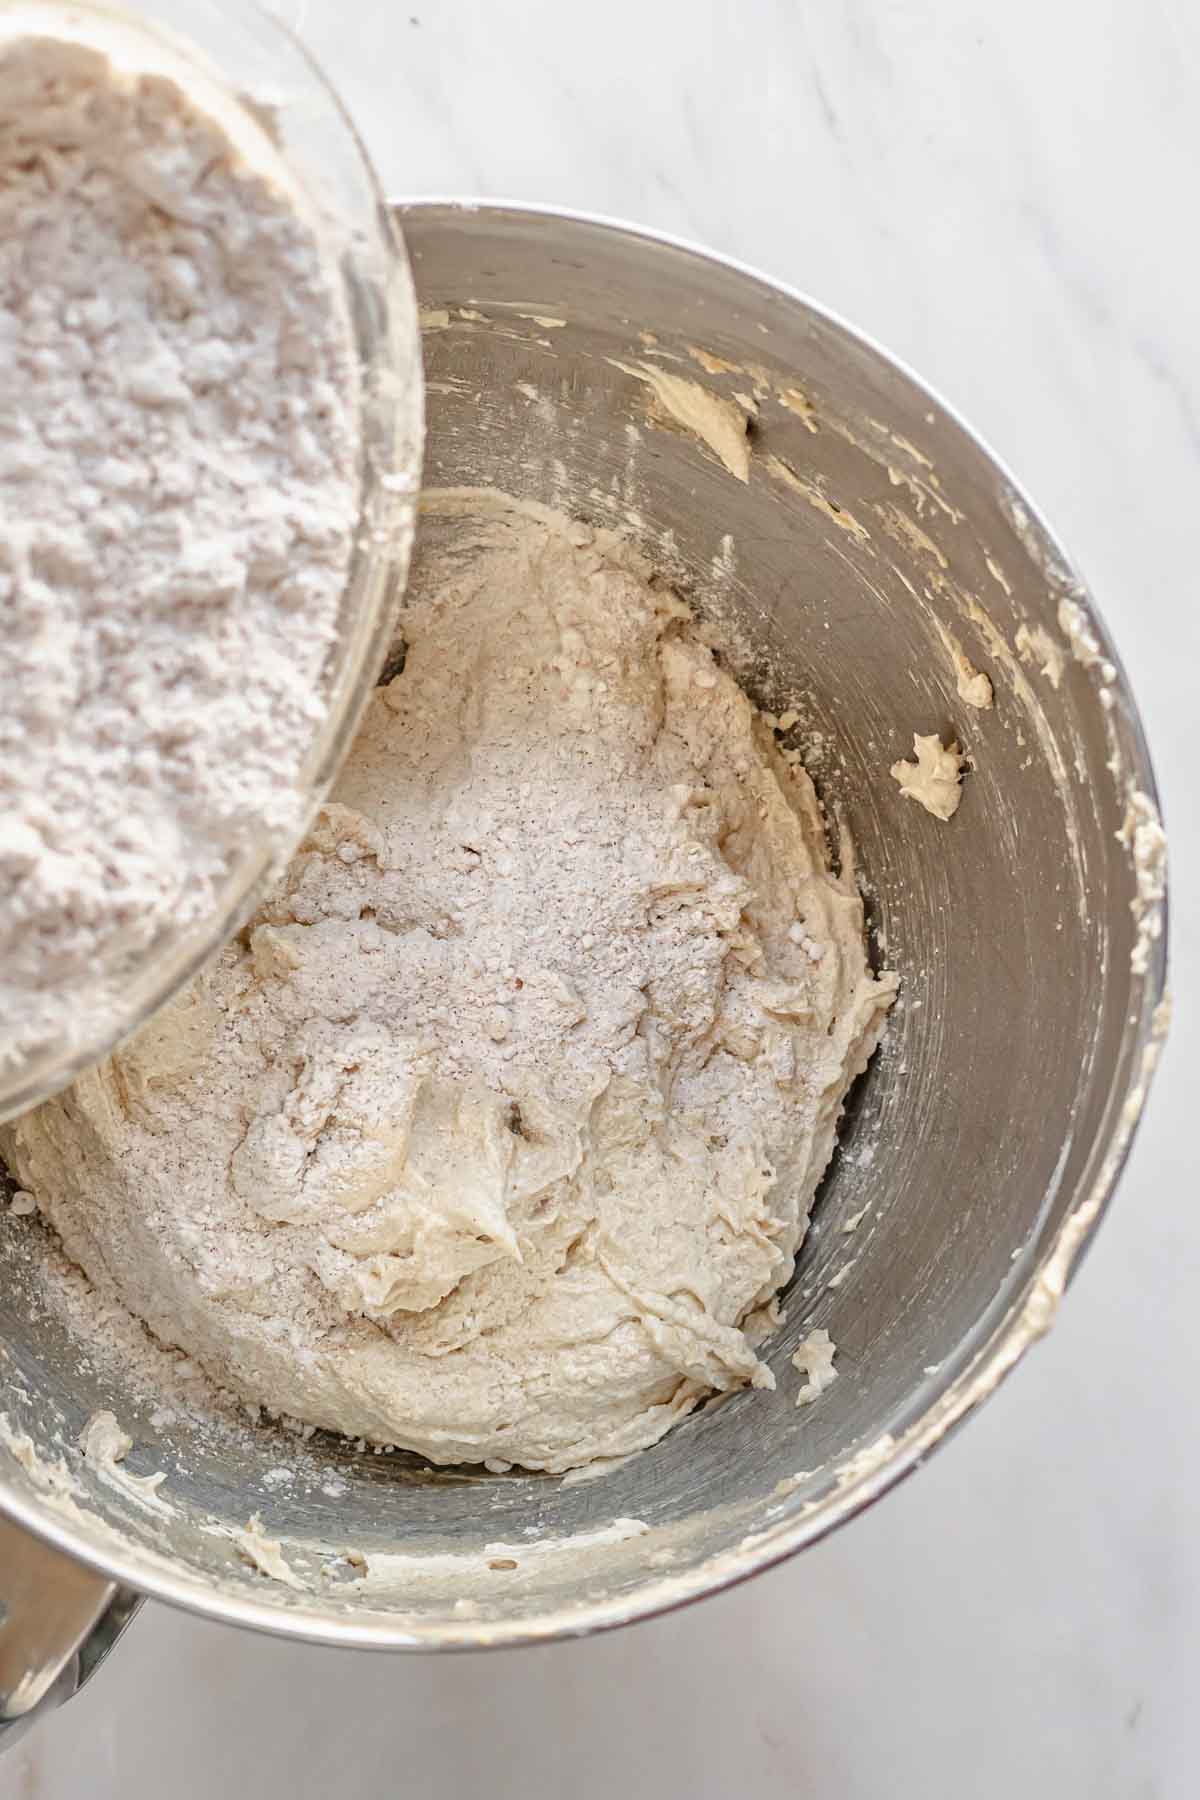 Flour being poured into wet cake batter.